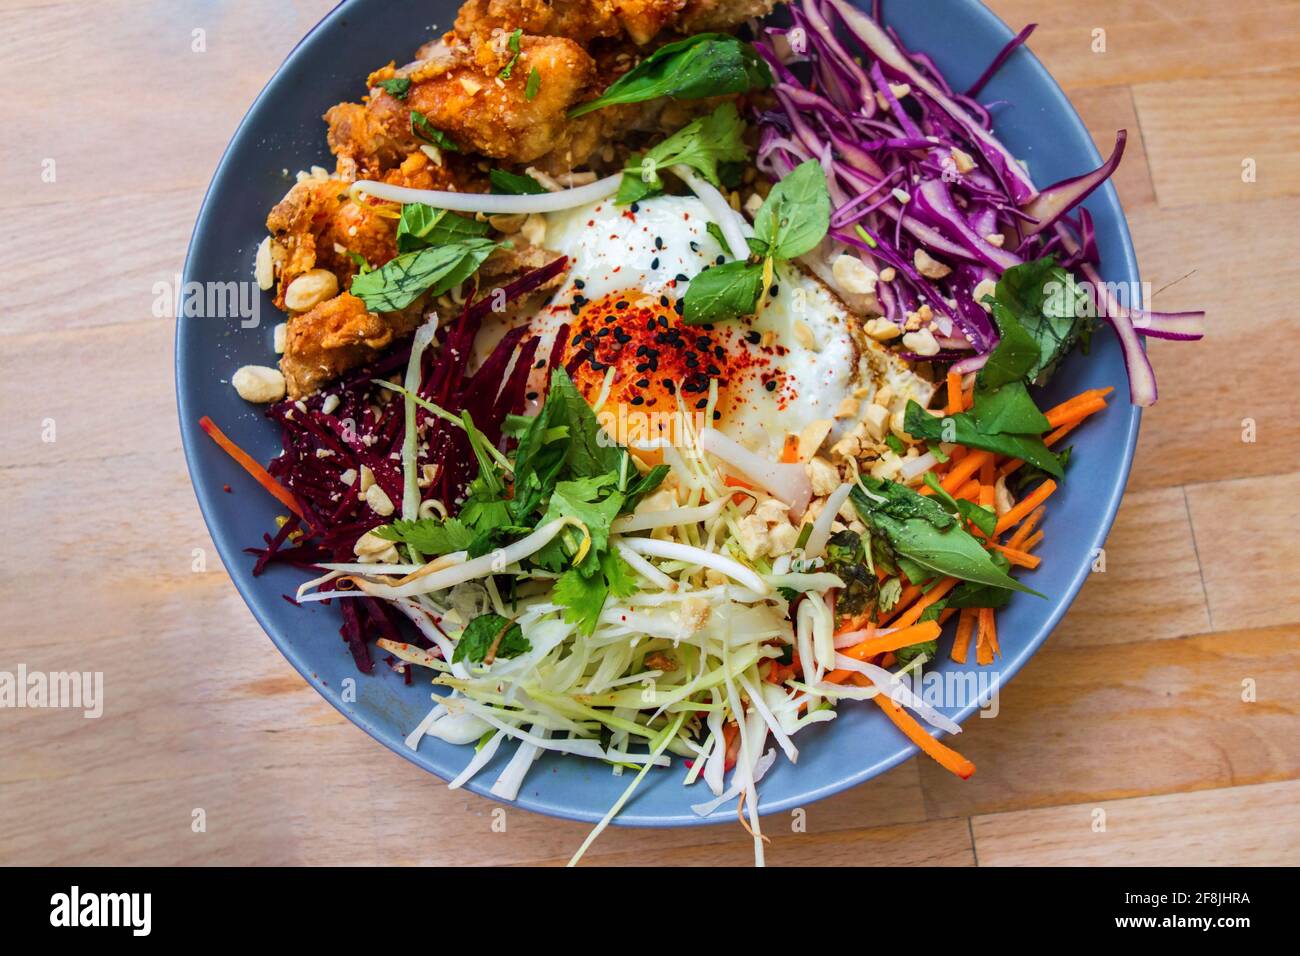 Asian meal with grated raw vegetables (lettuce,cabbage,carrot), green herbs, soft-boiled egg and chicken pieces in breadcrumbs. Stock Photo